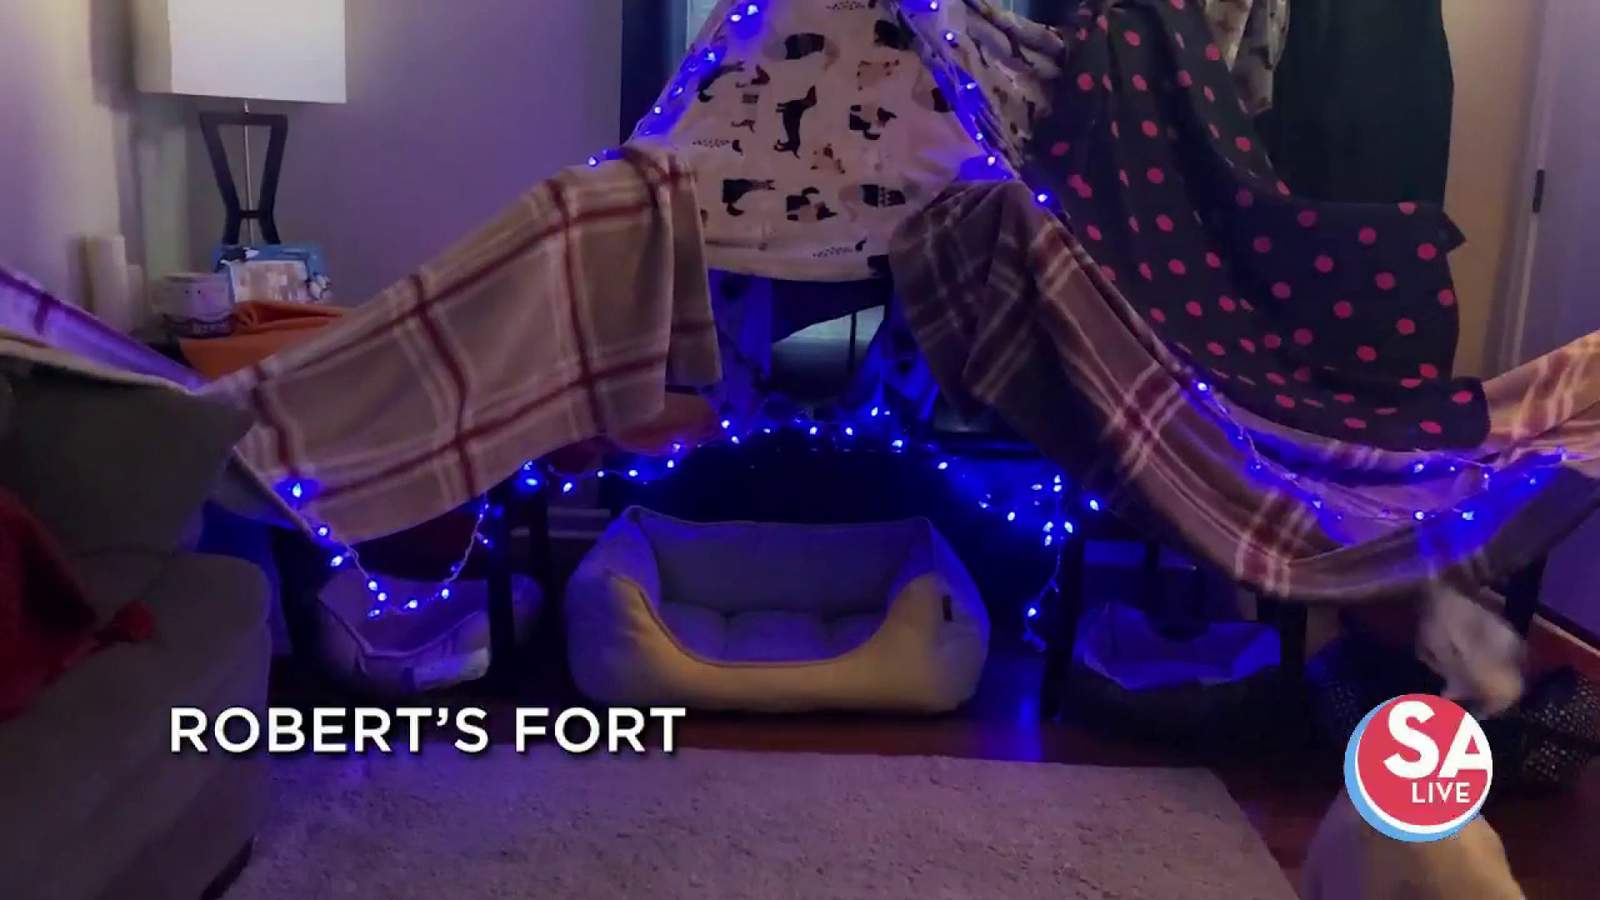 Work from home in your blanket fort! l SA Live l KSAT 12